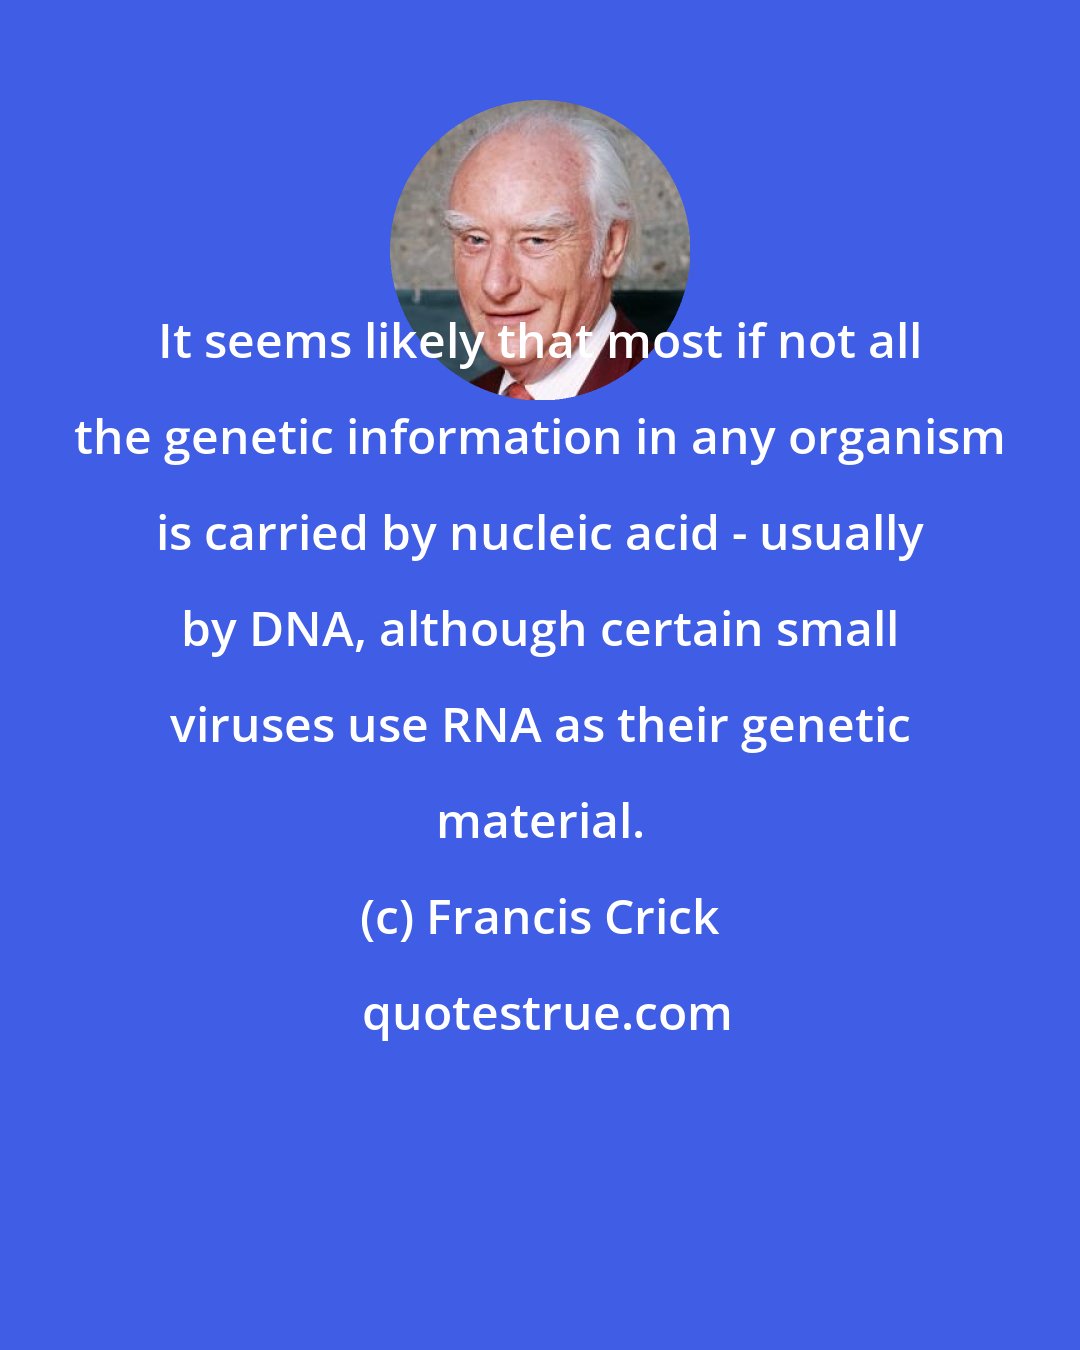 Francis Crick: It seems likely that most if not all the genetic information in any organism is carried by nucleic acid - usually by DNA, although certain small viruses use RNA as their genetic material.